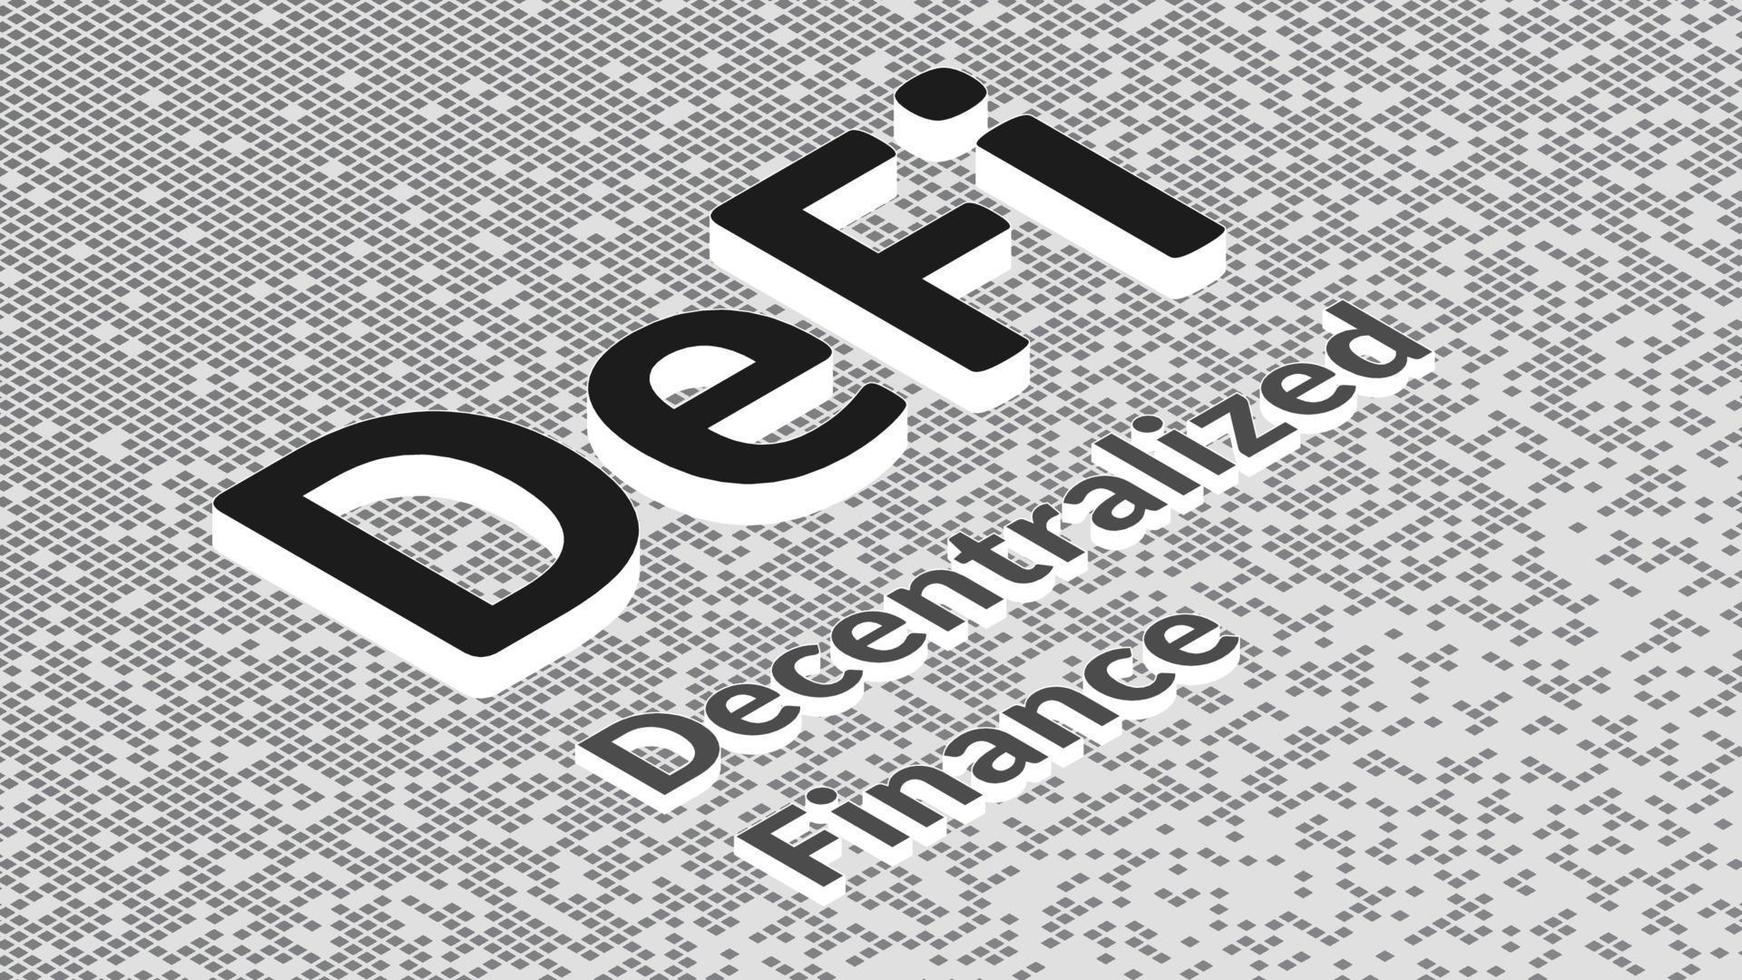 Defi - decentralized finance, isometric text on fragmented matrix black and white background from squares. Ecosystem of financial applications and services based on public blockchains. vector